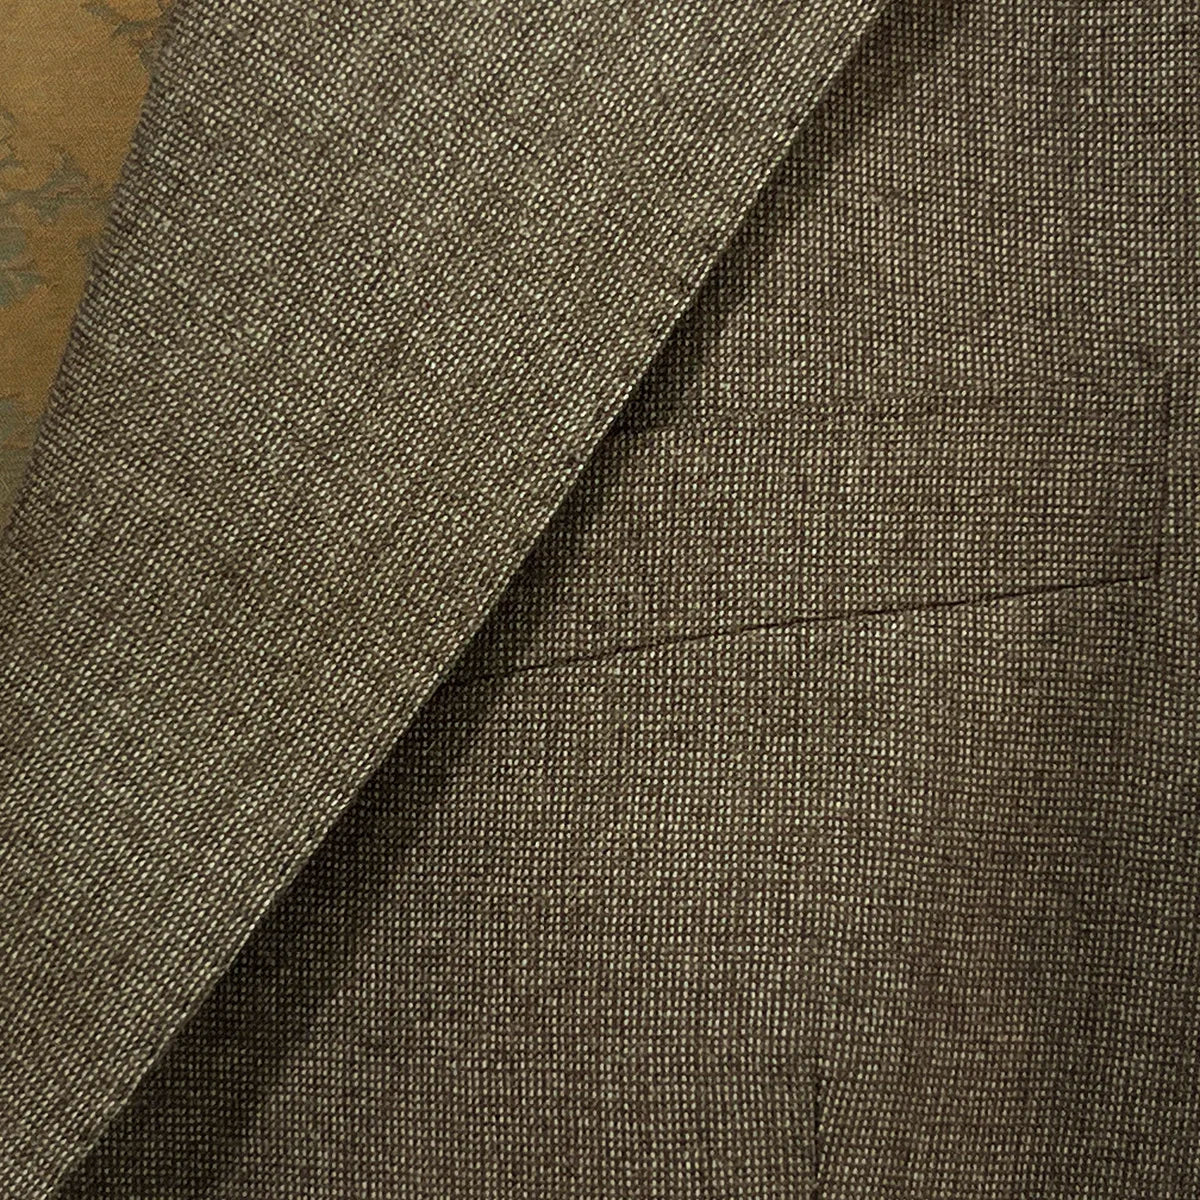 View of the built-in pocket square on the Westwood Hart brown nailhead men's suit jacket, adding a touch of elegance to the design.